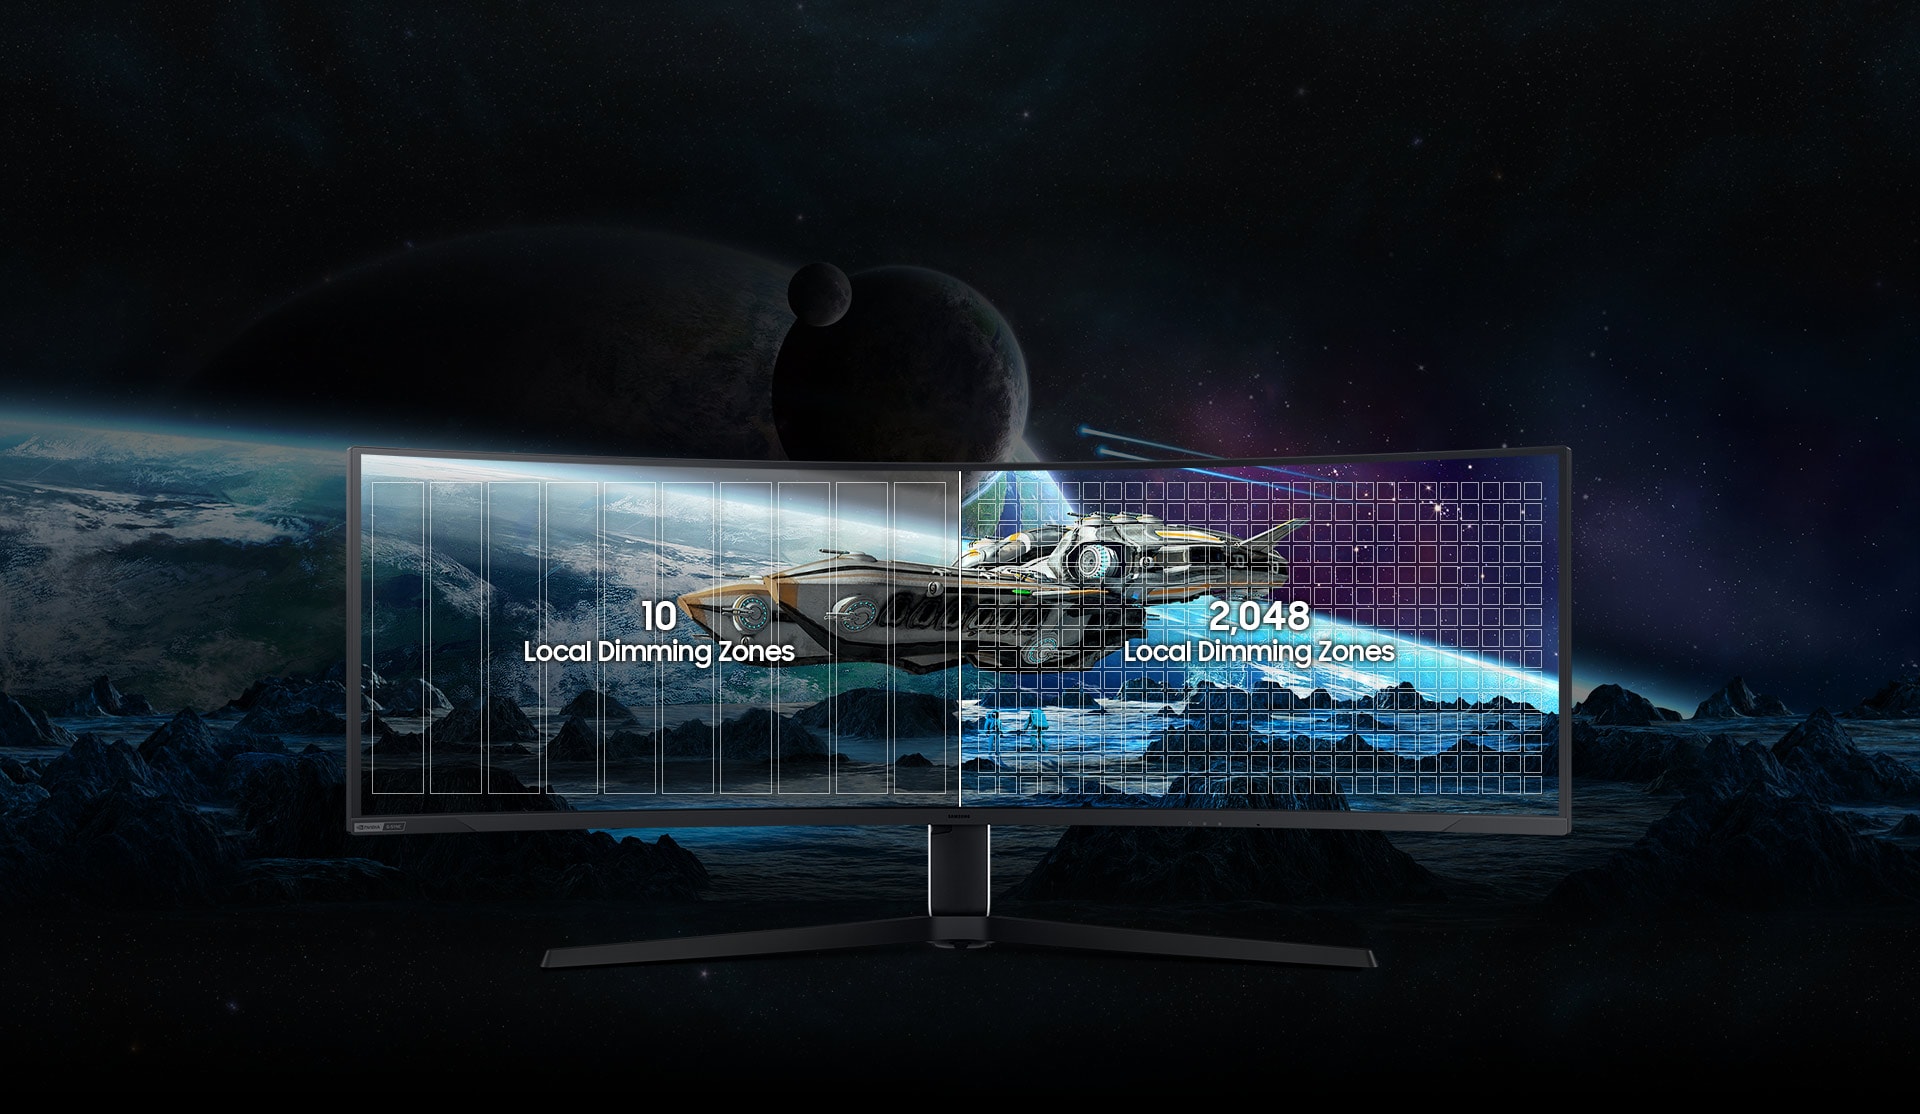 Odyssey Neo G9 is shown with a spaceship on its screen flying low over a mountainous planet. Behind the spaceship is another planet, which extends off the screen into the background. The screen is split into two halves. On the left, the words “10 Local Dimming Zones” appear, while on the right, the words “2,048 Local Dimming Zones” are shown.